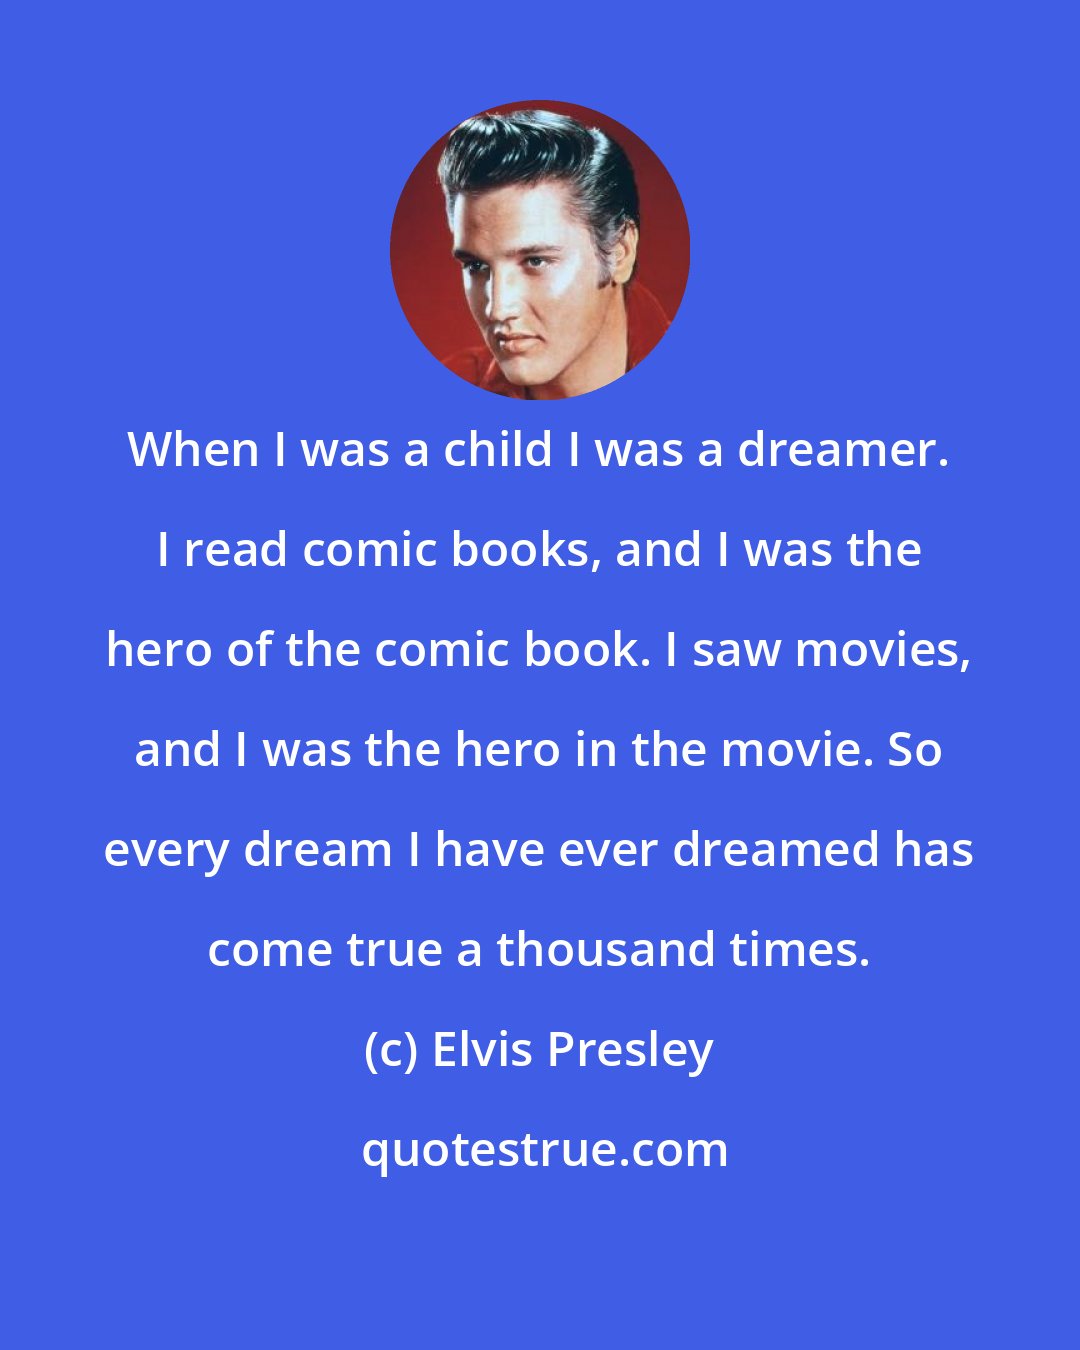 Elvis Presley: When I was a child I was a dreamer. I read comic books, and I was the hero of the comic book. I saw movies, and I was the hero in the movie. So every dream I have ever dreamed has come true a thousand times.